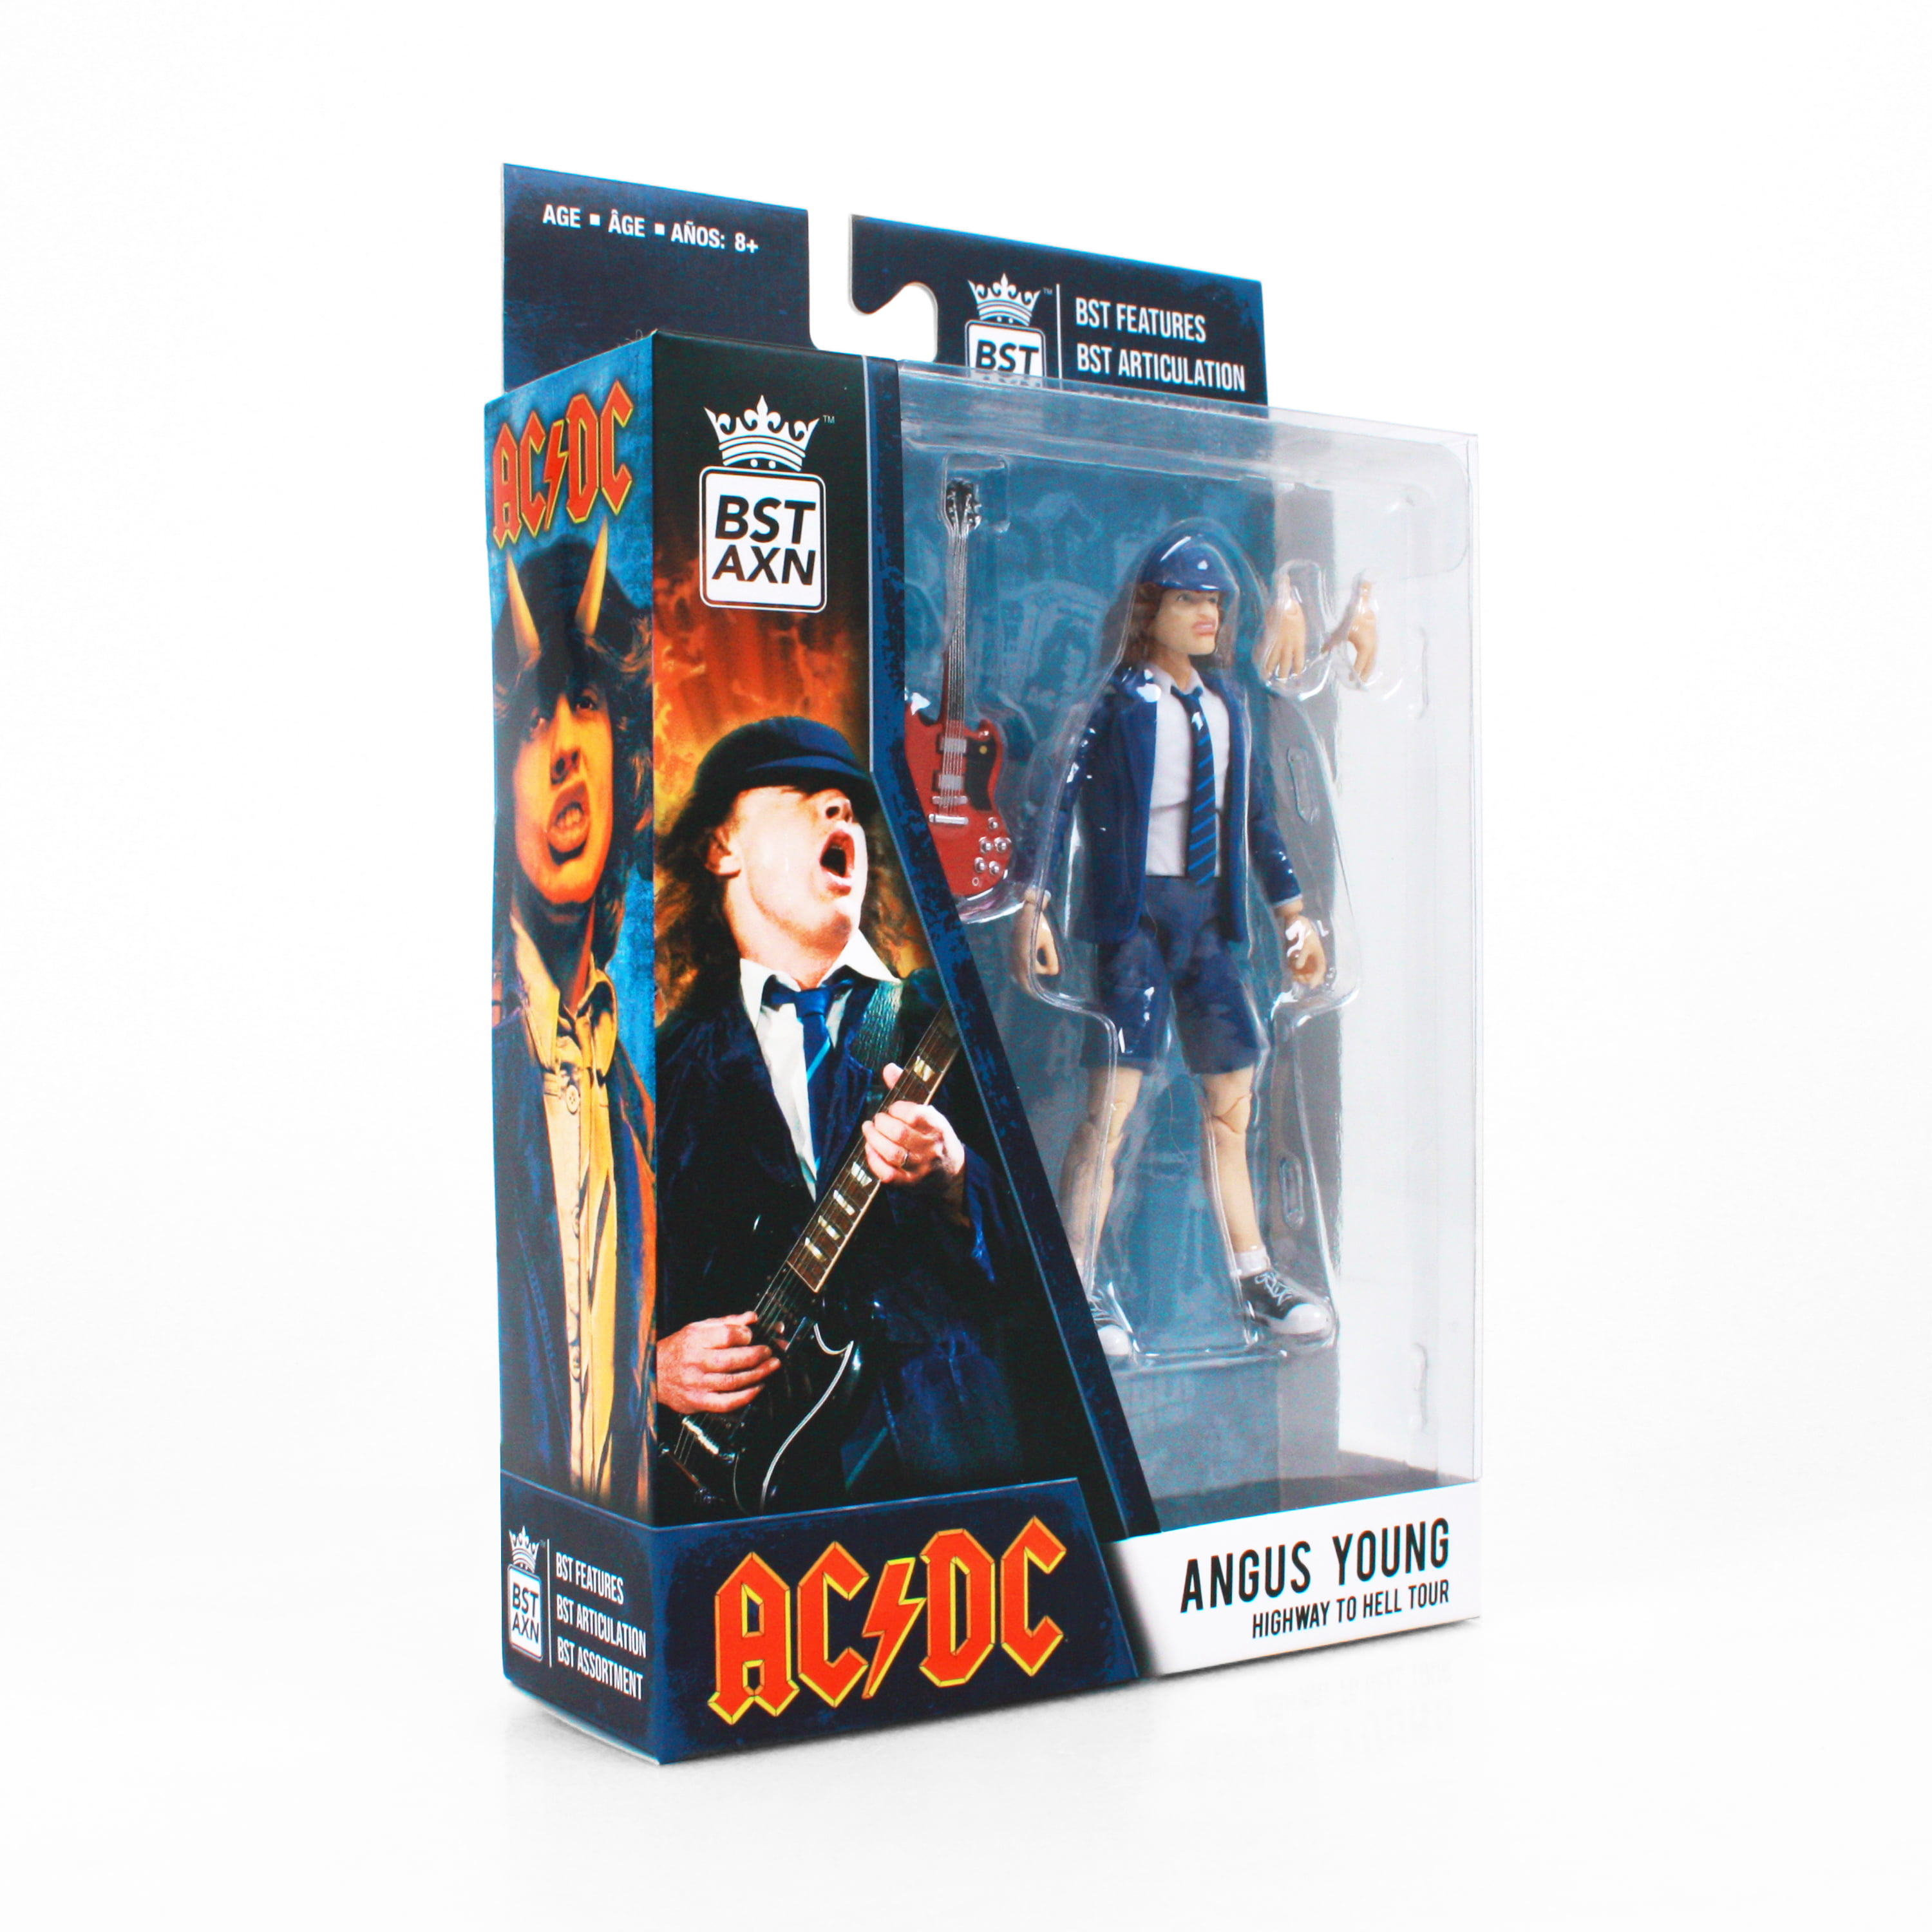 ANGUS YOUNG Action Figure AC/DC The Loyal Subjects BST AXN 13 cm PRE-ORDER!! 